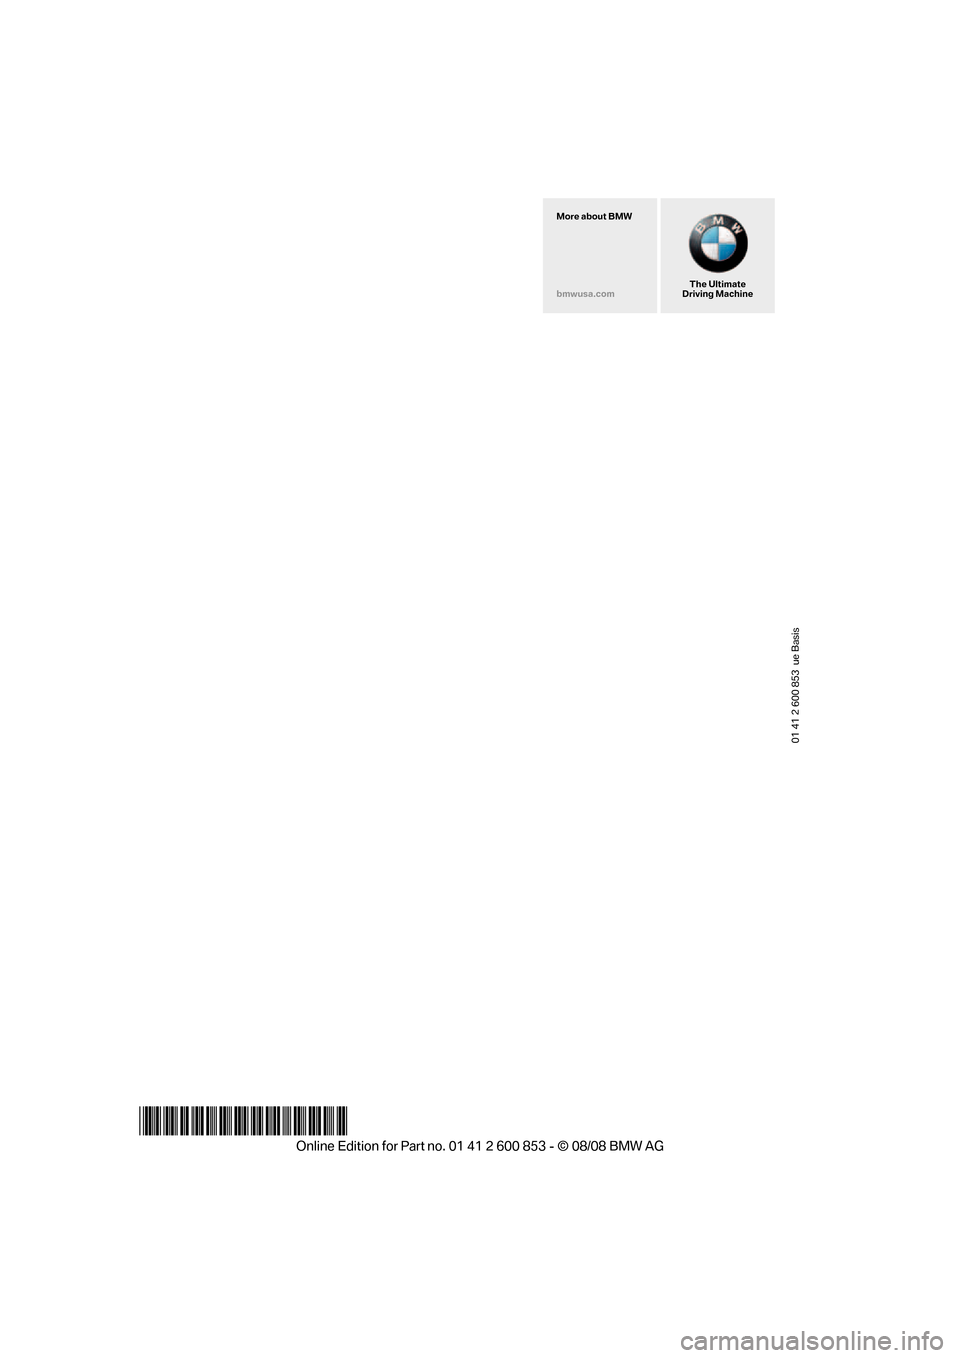 BMW 128I 2009 E81 Owners Manual 01 41 2 600 853  ue Basis
*BL260085300W*
The Ultimate
Driving Machine More about BMW
bmwusa.com 